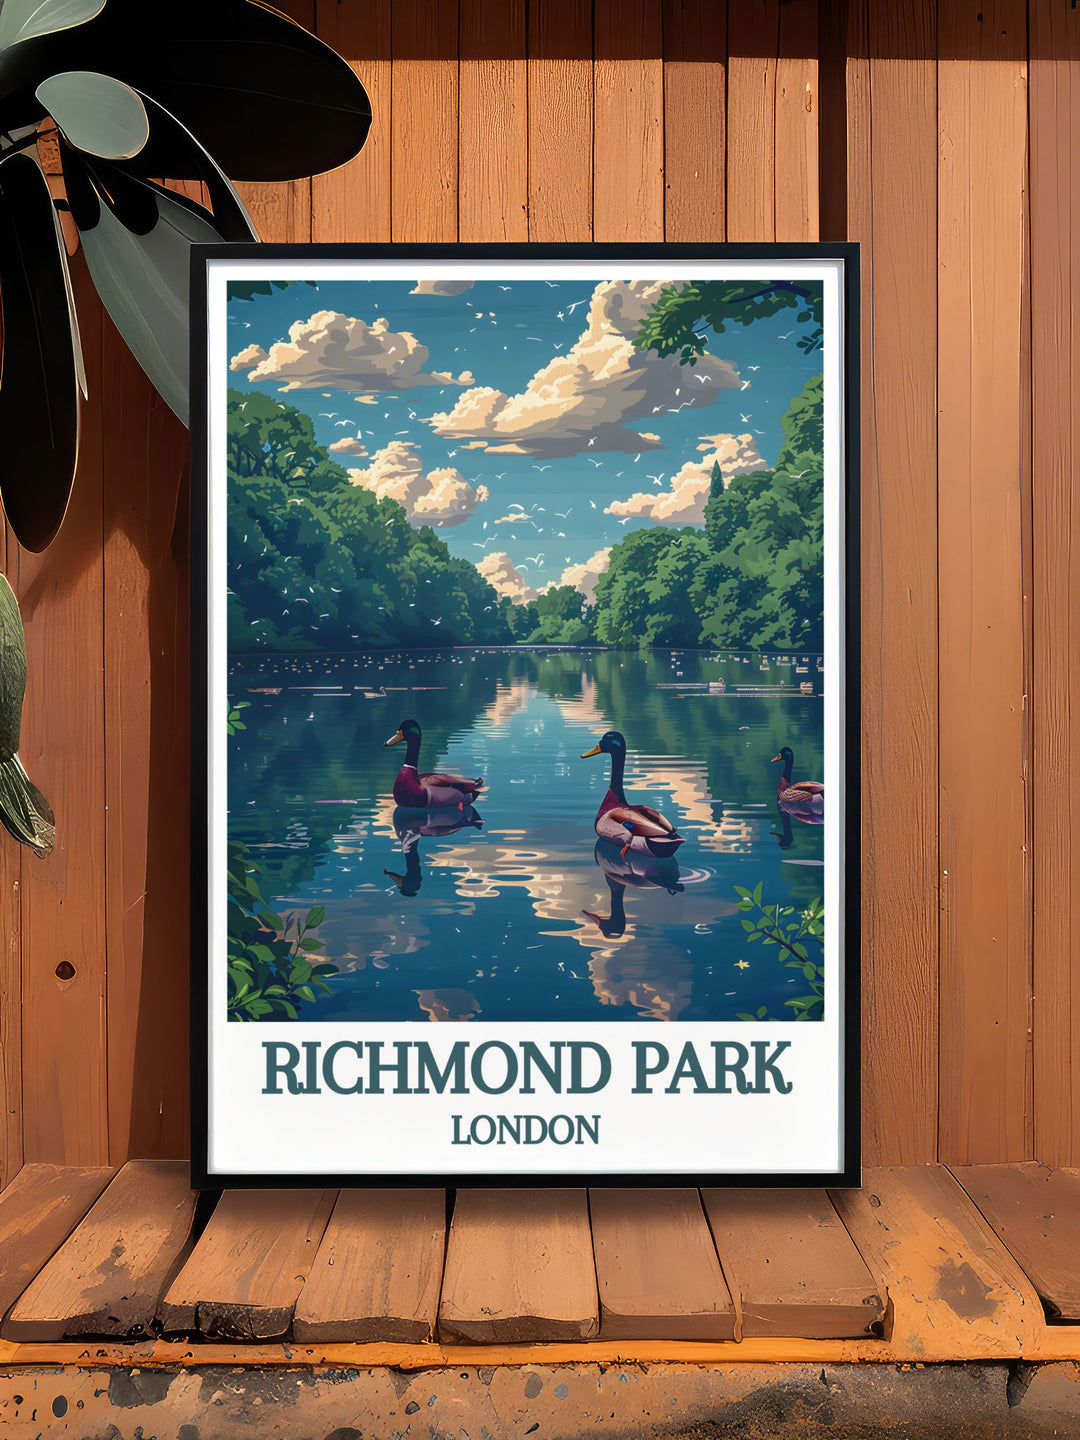 Pen Ponds Posters celebrating the scenic landscapes and historical charm of this beloved London park, perfect for any decor.